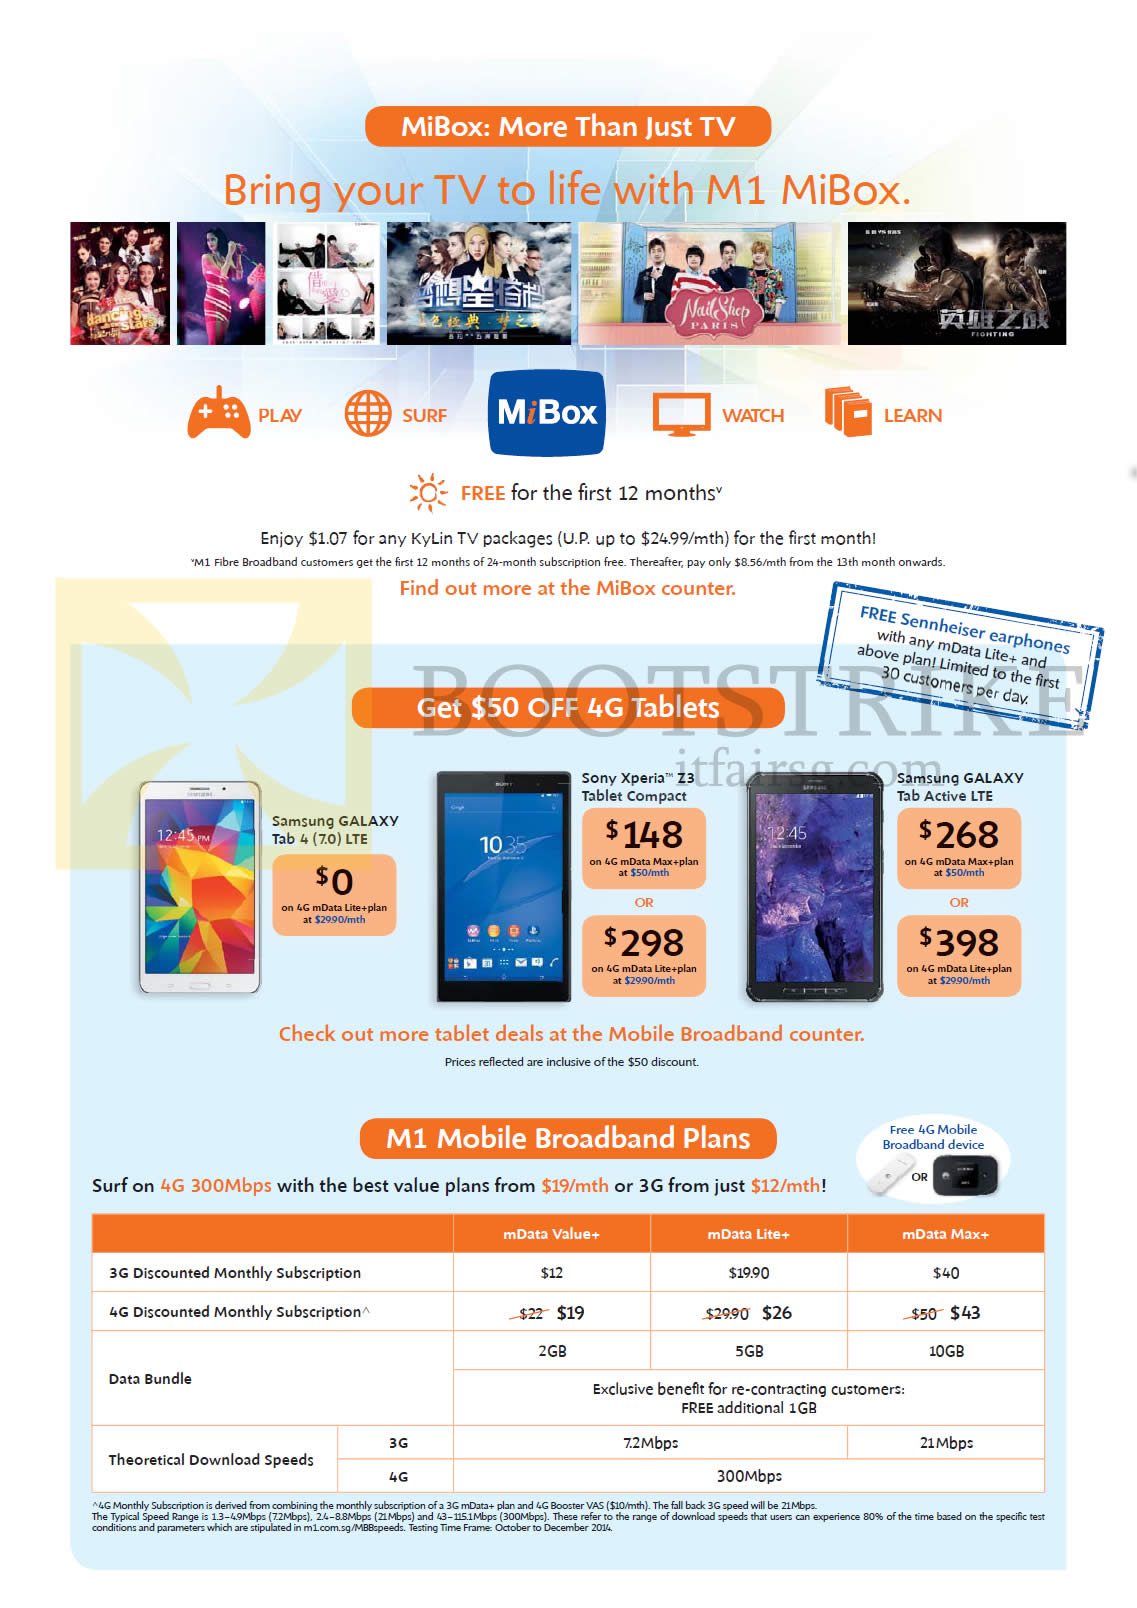 IT SHOW 2015 price list image brochure of M1 MiBox, Tablets, Mobile Broadband Plans, Samsung Galaxy Tab 4 7.0, Tab Active, Sony Xperia Z3 Compact, MData Plans